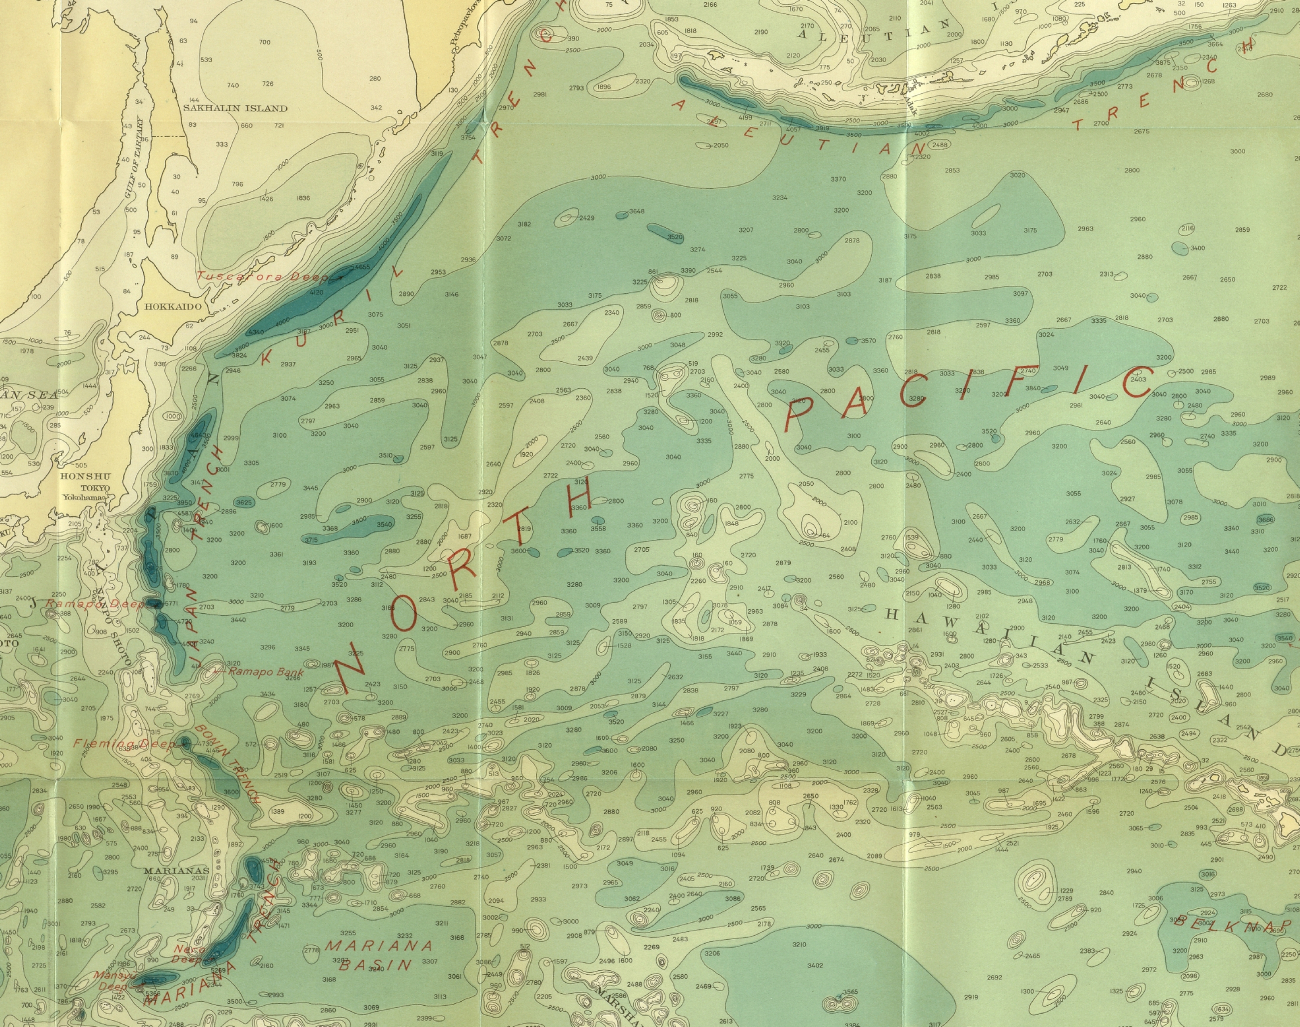 Section of 1939 North Pacific chart 5486 by Navy Hydrographic Office showinghundreds of seamounts, the true configuration of the Aleutian Trench, and someof the southern seamounts of what became known as the Emperor Seamount Chainextending north from the vicinity of Midway Island